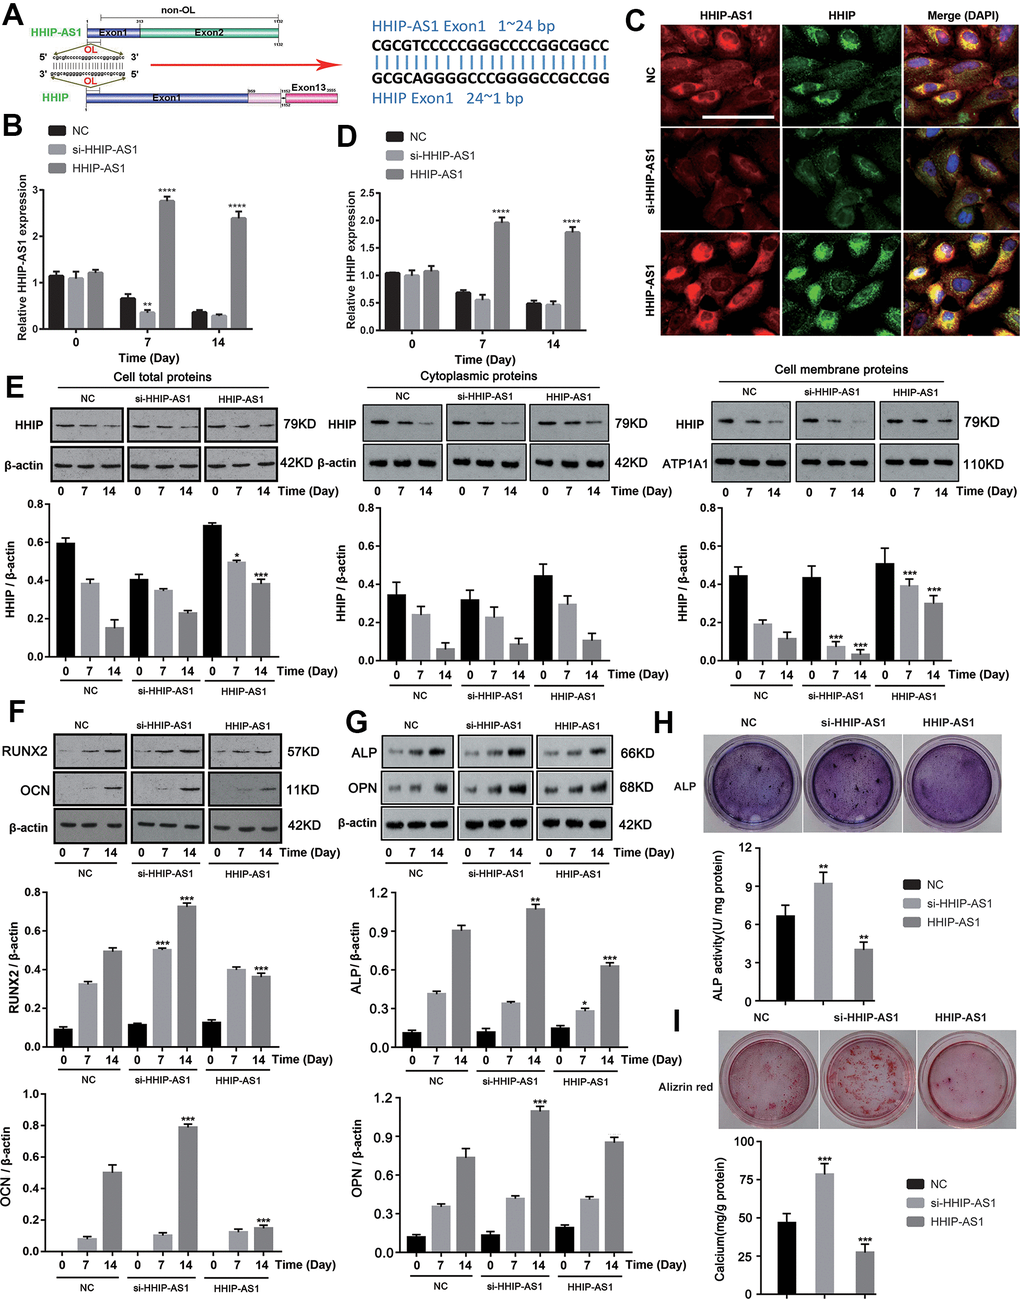 lncRNA HHIP-AS1 up-regulates HHIP expression and inhibits osteogenic differentiation of BM-MSCs. (A) The complementary sequence of the first exon of HHIP-AS1 and the first exon of HHIP. (B) lncRNA HHIP-AS1 in si-HHIP-AS1 or HHIP-AS1 transfected BM-MSCs was detected by PCR. (C) Fluorescence images of lncRNA HHIP-AS1 (Red), HHIP protein (Green) and DAPI (Blue) in BM-MSCs transfected with NC, si-HHIP-AS1 and HHIP-AS1. (D) HHIP mRNA in si-HHIP-AS1 or HHIP-AS1 transfected BM-MSCs detected by PCR. (E) HHIP protein in cell or in cell fractions of cytoplasm and cell membrane was detected by western blot after overexpression or knockdown of lncRNA HHIP-AS1. (F) RUNX2 and OCN as well as (G) ALP and OPN protein levels in cells were detected by western blot after overexpression or knockdown of lncRNA HHIP-AS1. (H) ALP and (I) alizarin red staining after 14 days of osteogenic induction of BM-MSCs. The histogram data for each group are the average of three independent replicates; bars represent standard deviation; *P P P P 